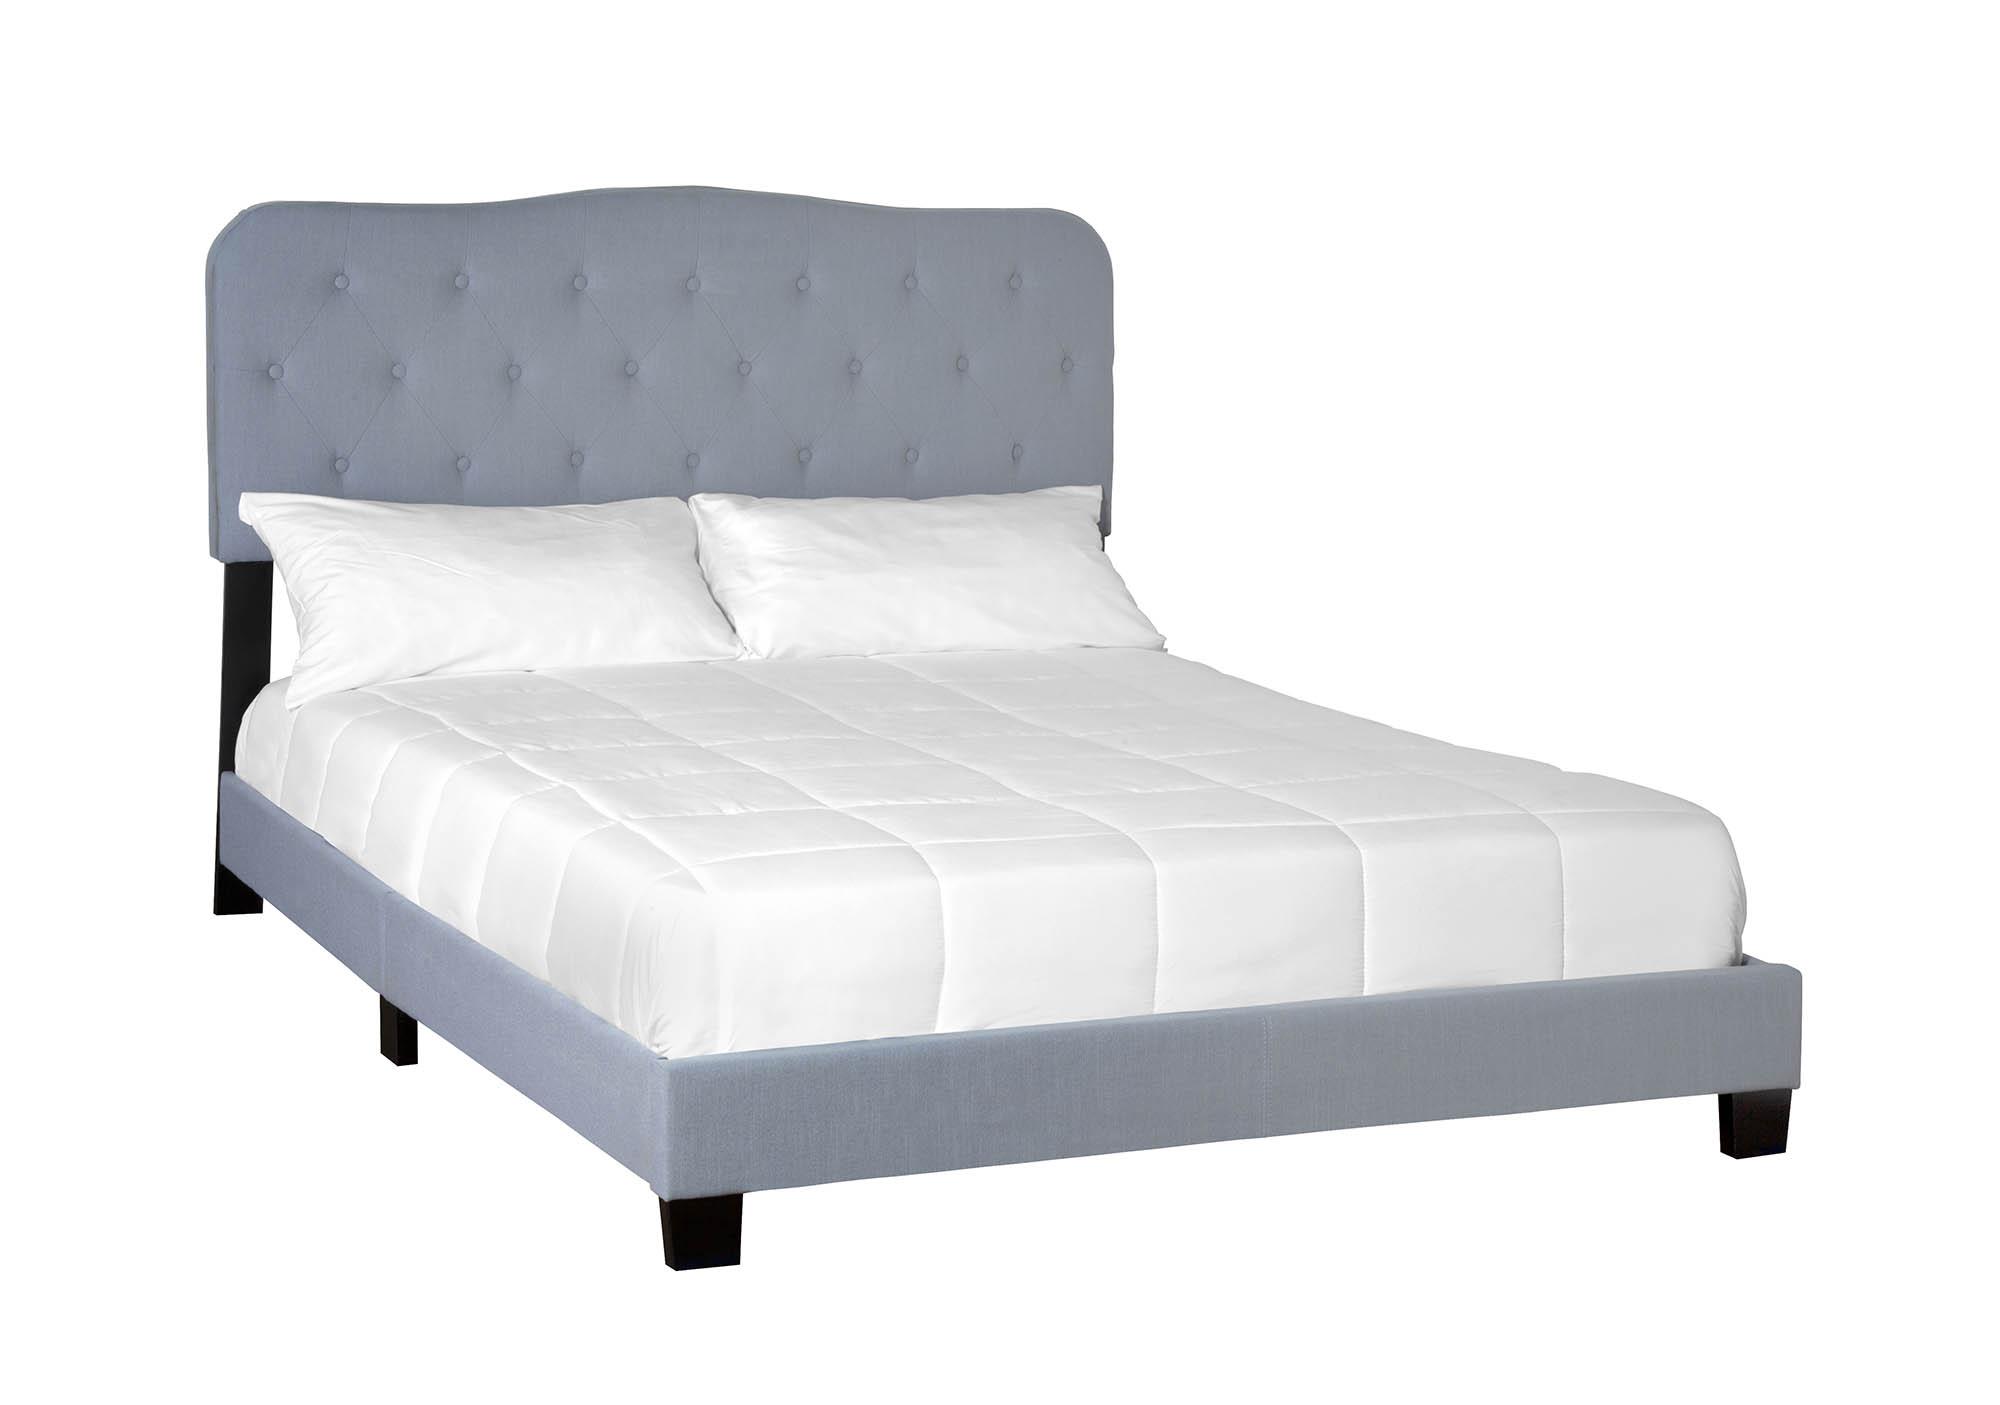 Modern, Transitional Panel Bed ARIANA 1603DS-110 1603DS-110 in Light Blue Fabric